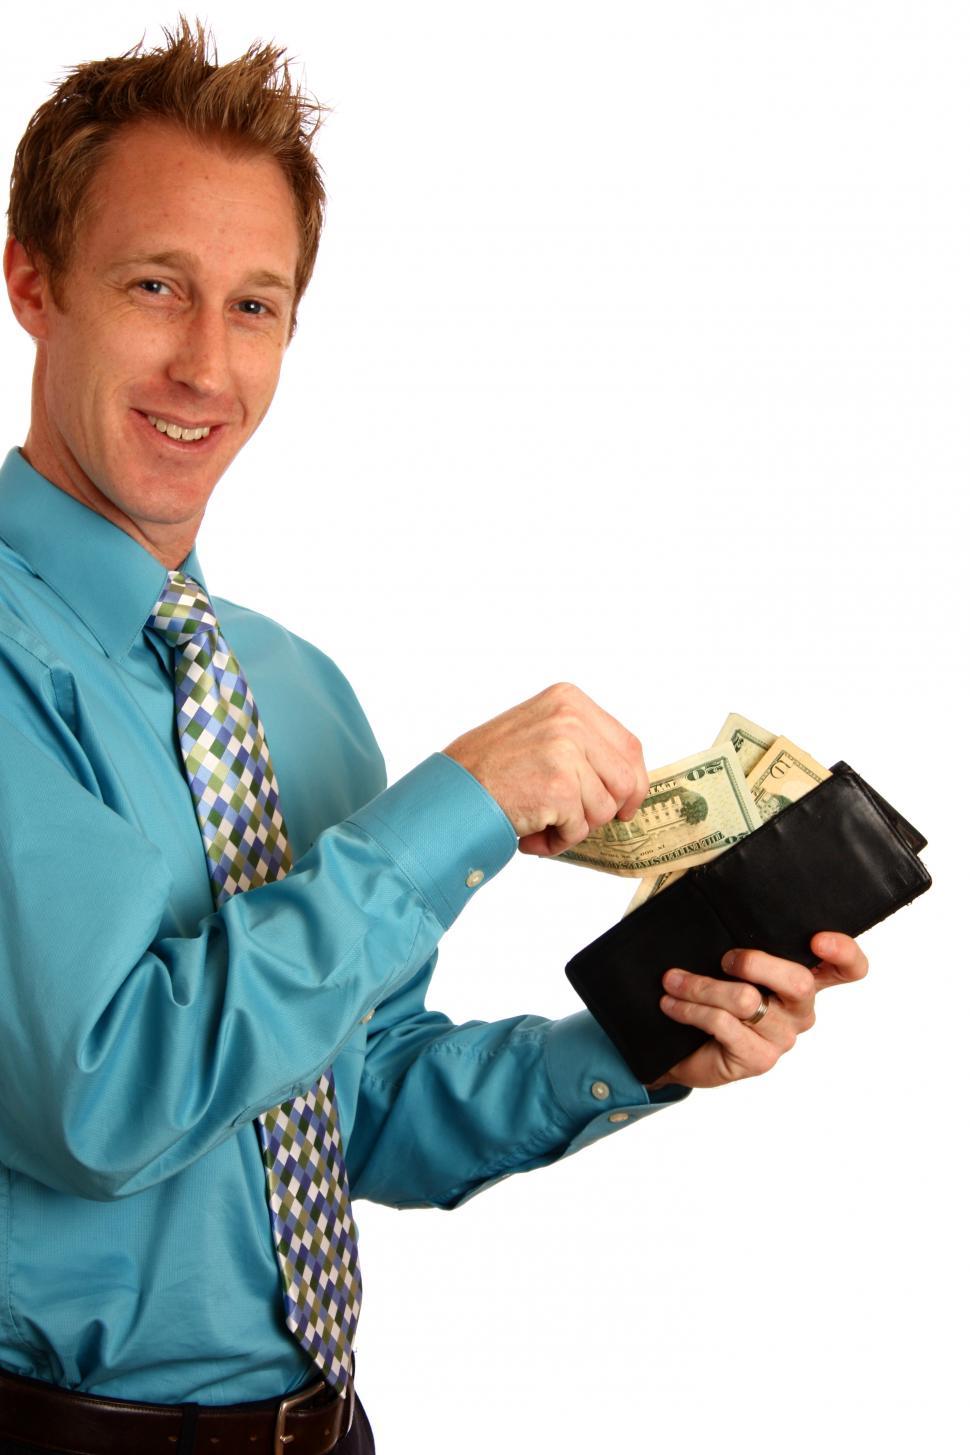 Free Image of A young businessman holding a wallet with money 